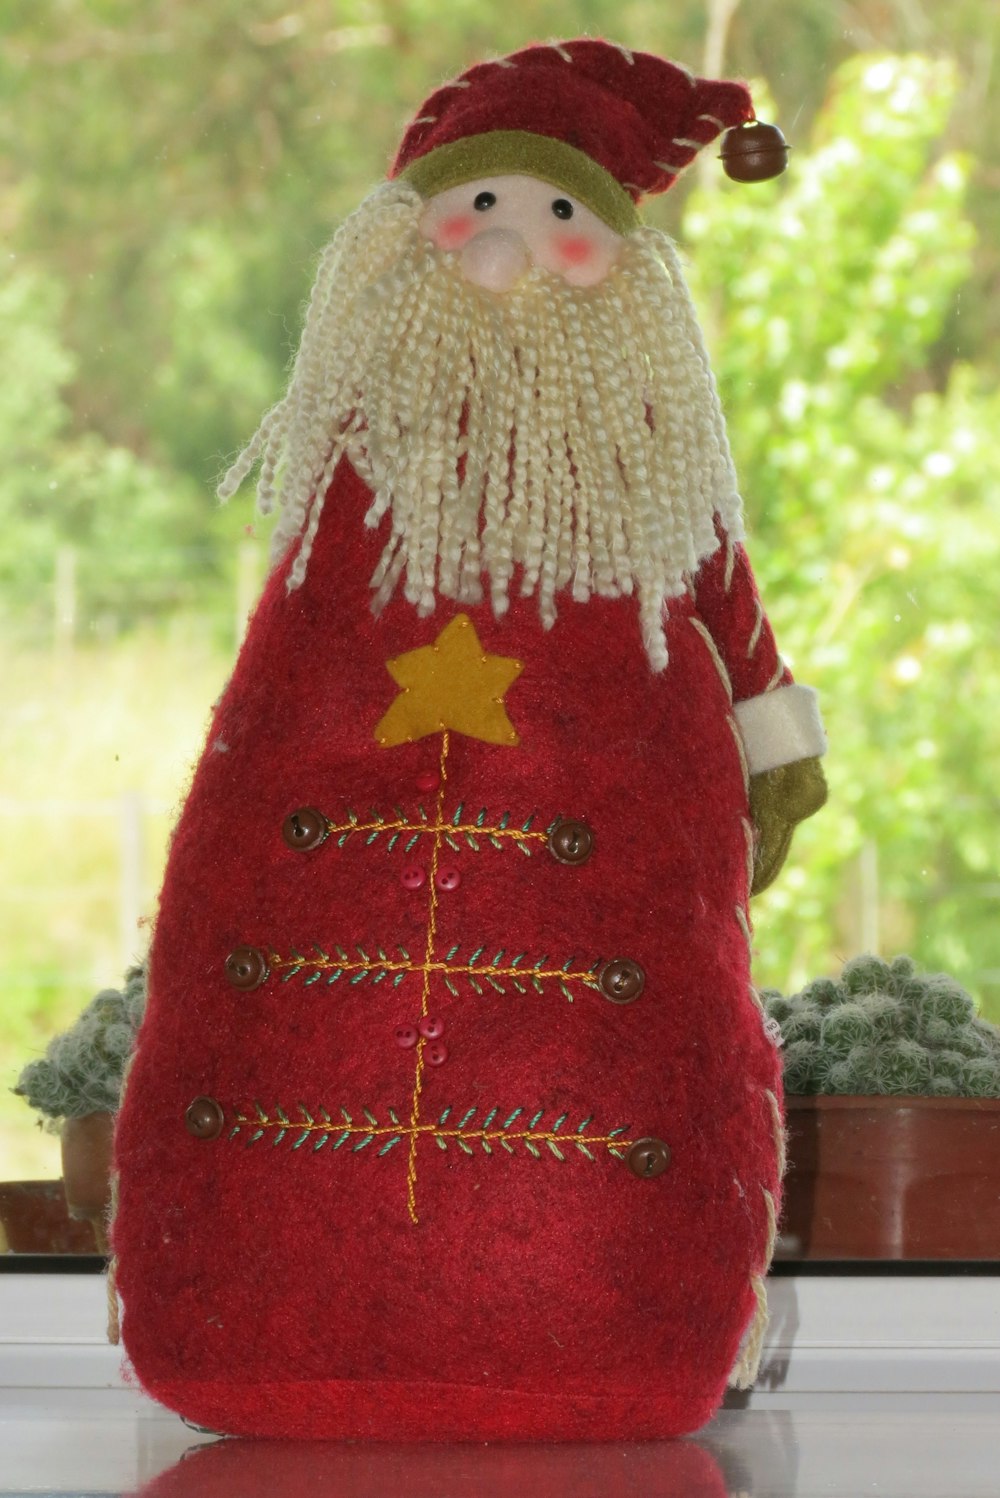 a red and white santa clause doll sitting on a window sill